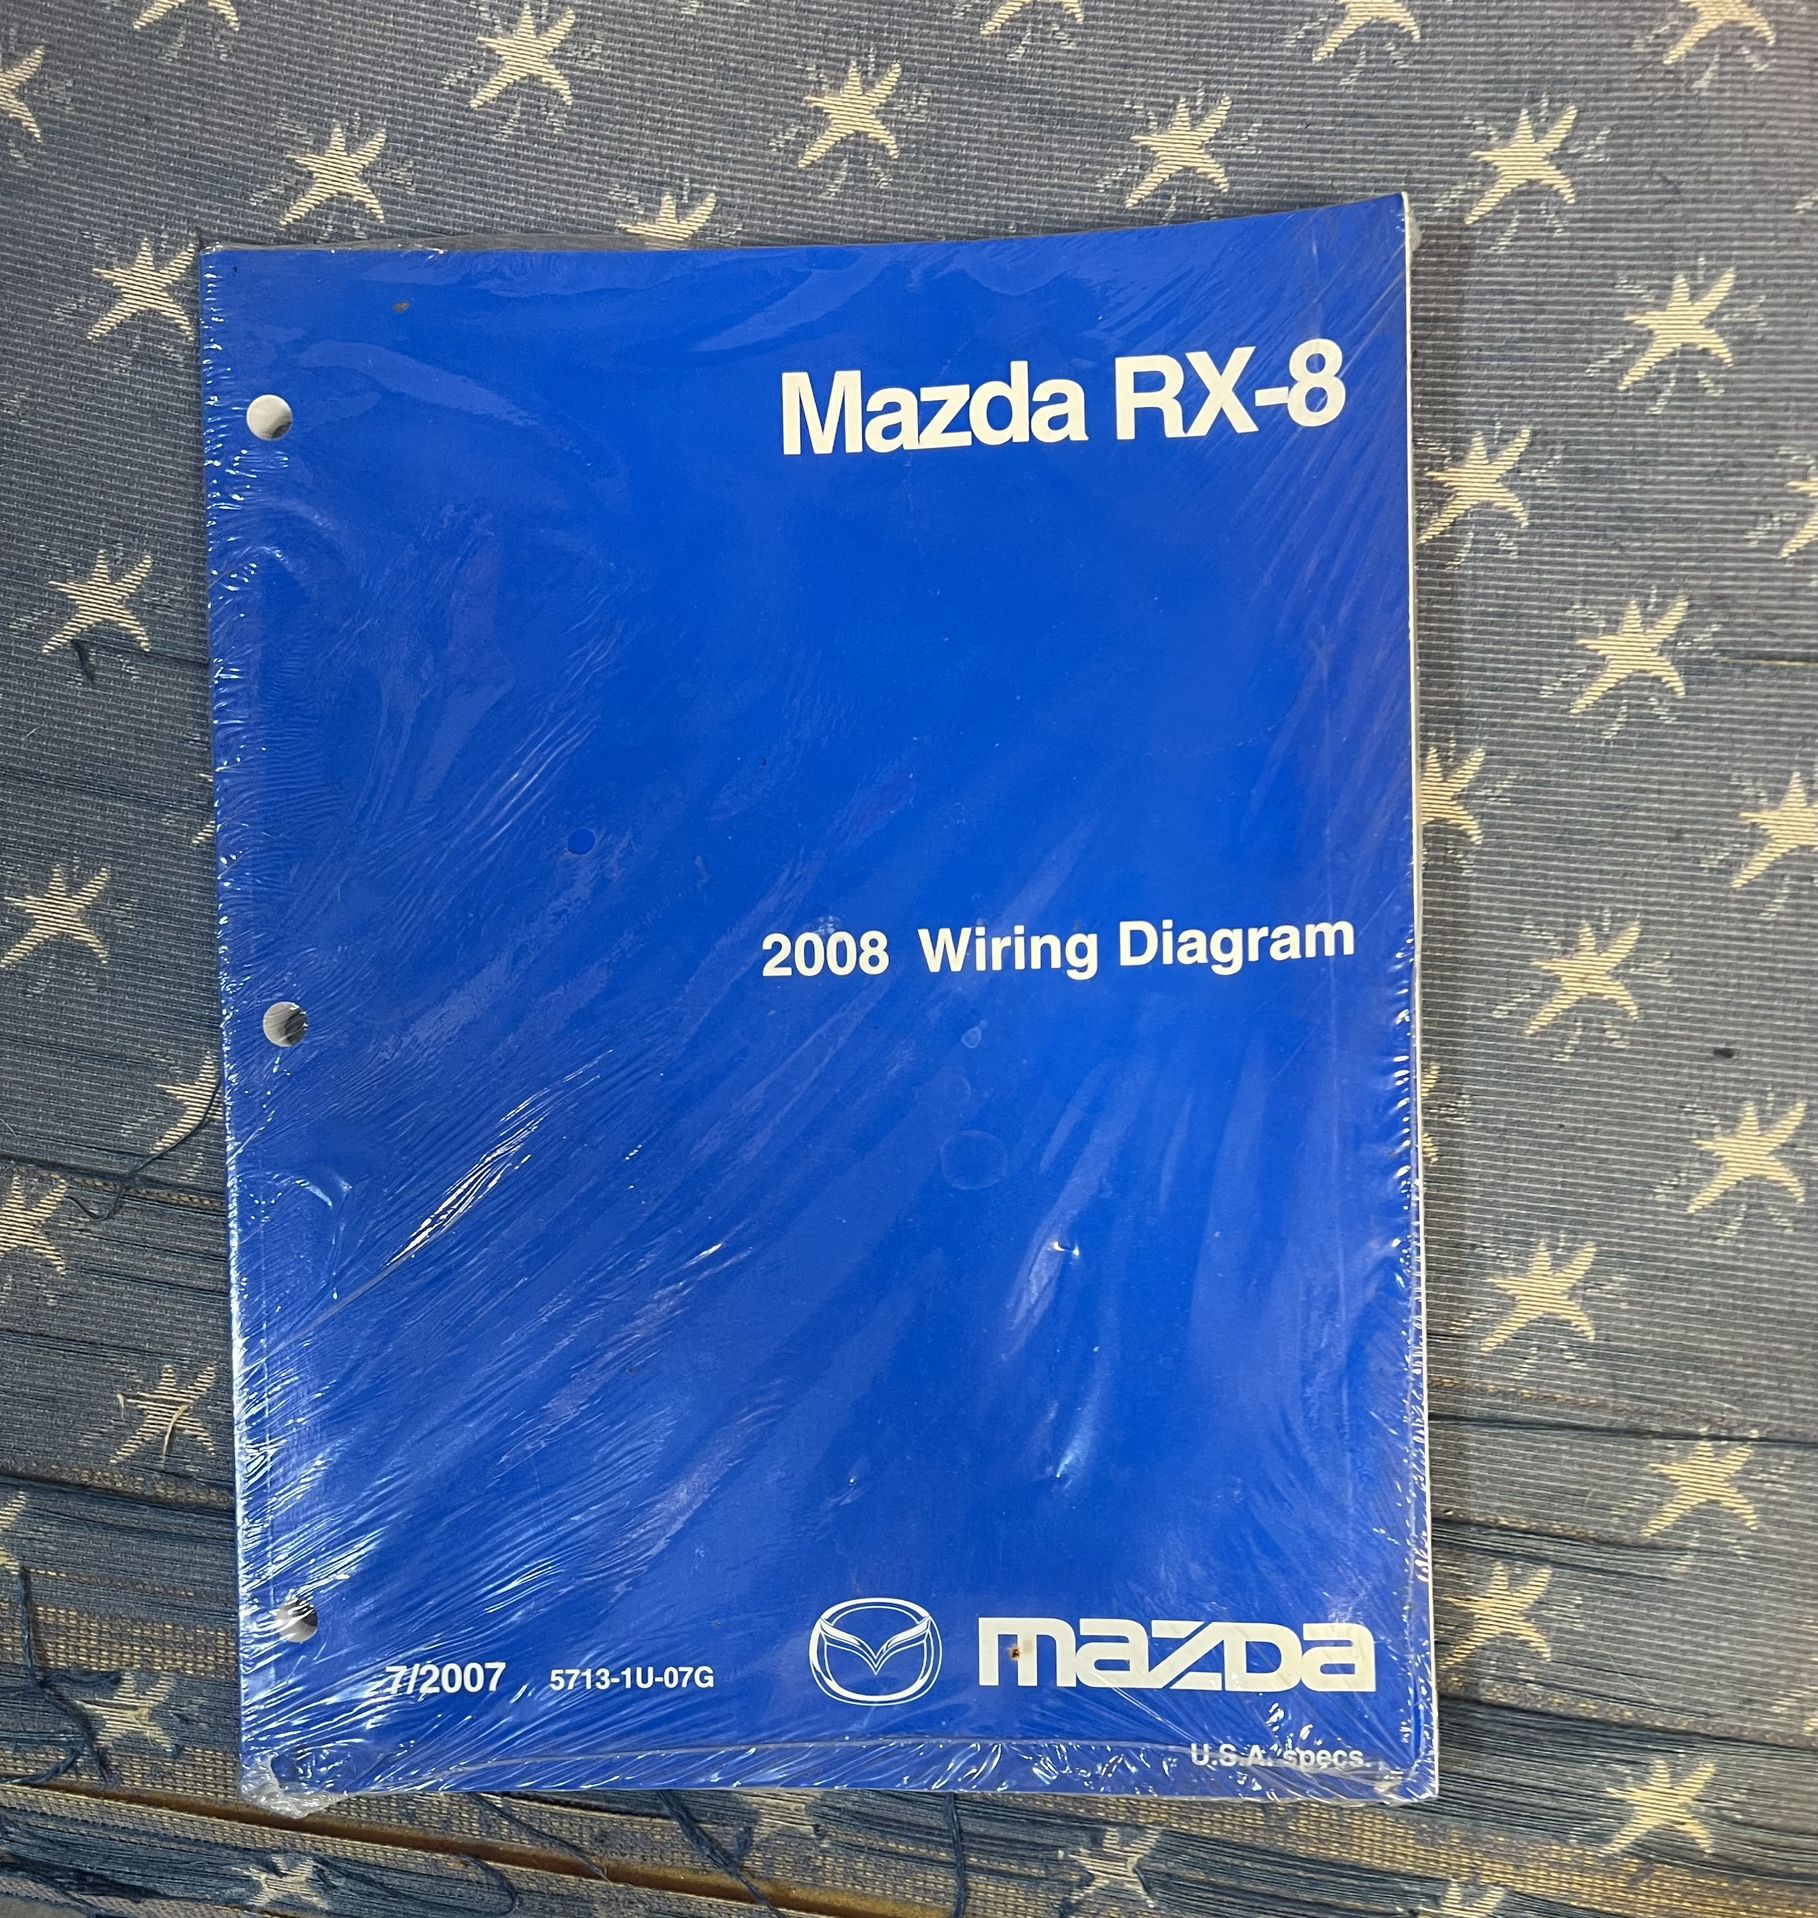 Workshop Manual And Wiring Diagram For 2008 Mazda RX-8